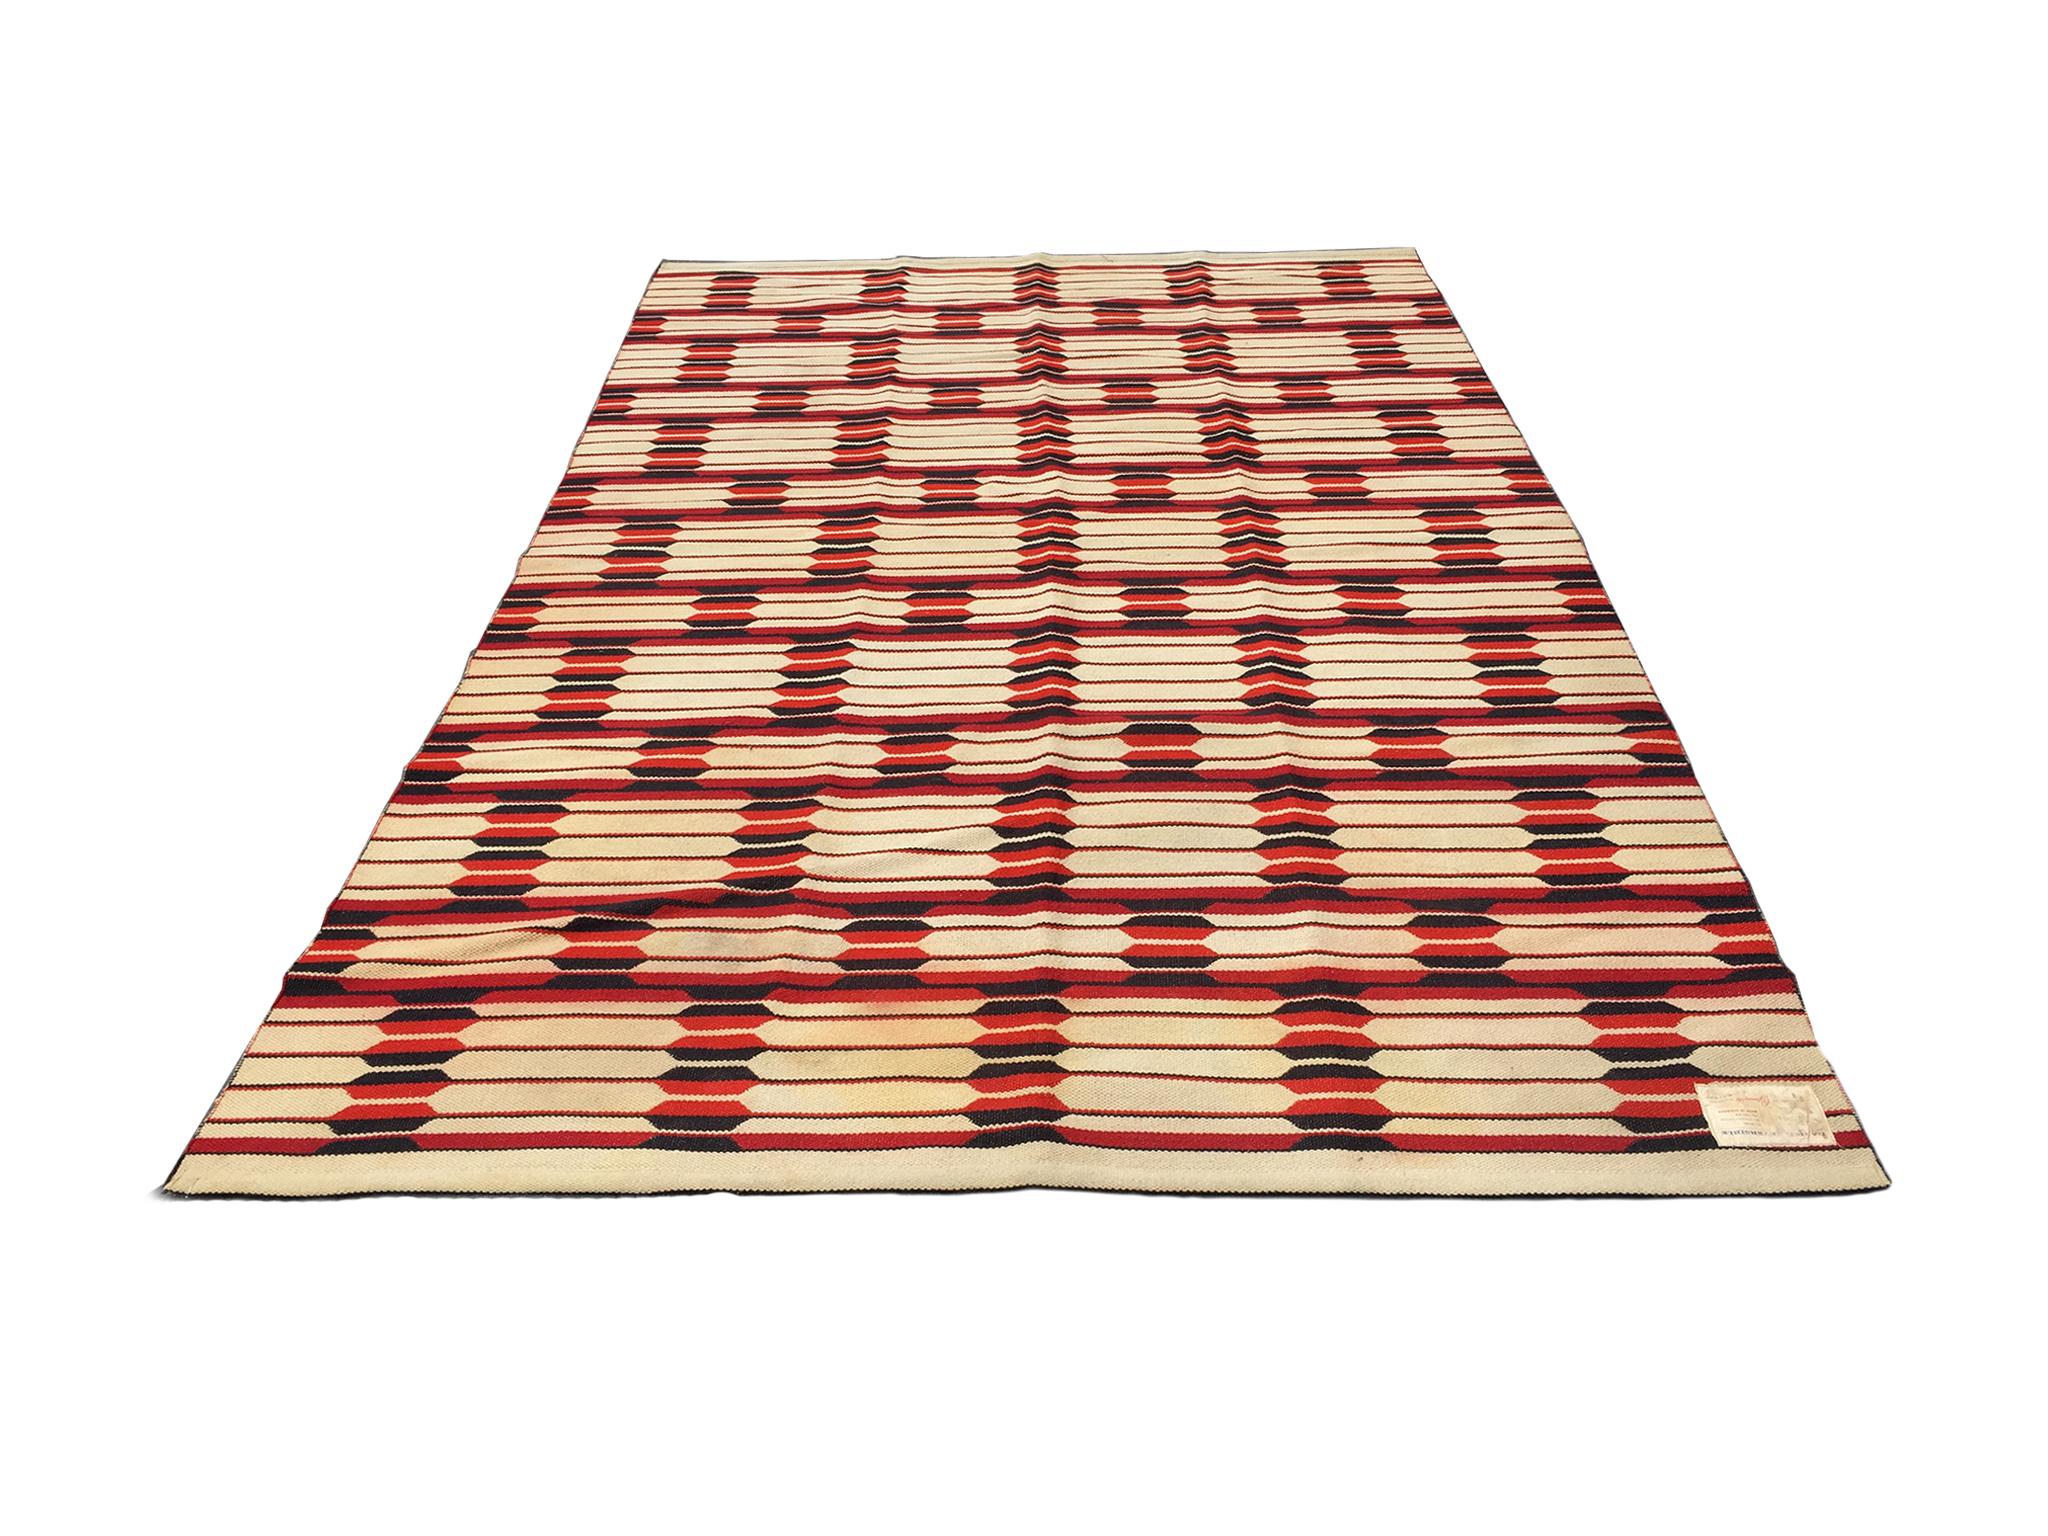 A Danish modern flat-weave rug designed and made exclusively for Bloomingdale's, 1960s. It is remarkable for its dynamic patterns of interlocking geometric shapes in a rich palette of red, black, and beige white. The rug is reversible which